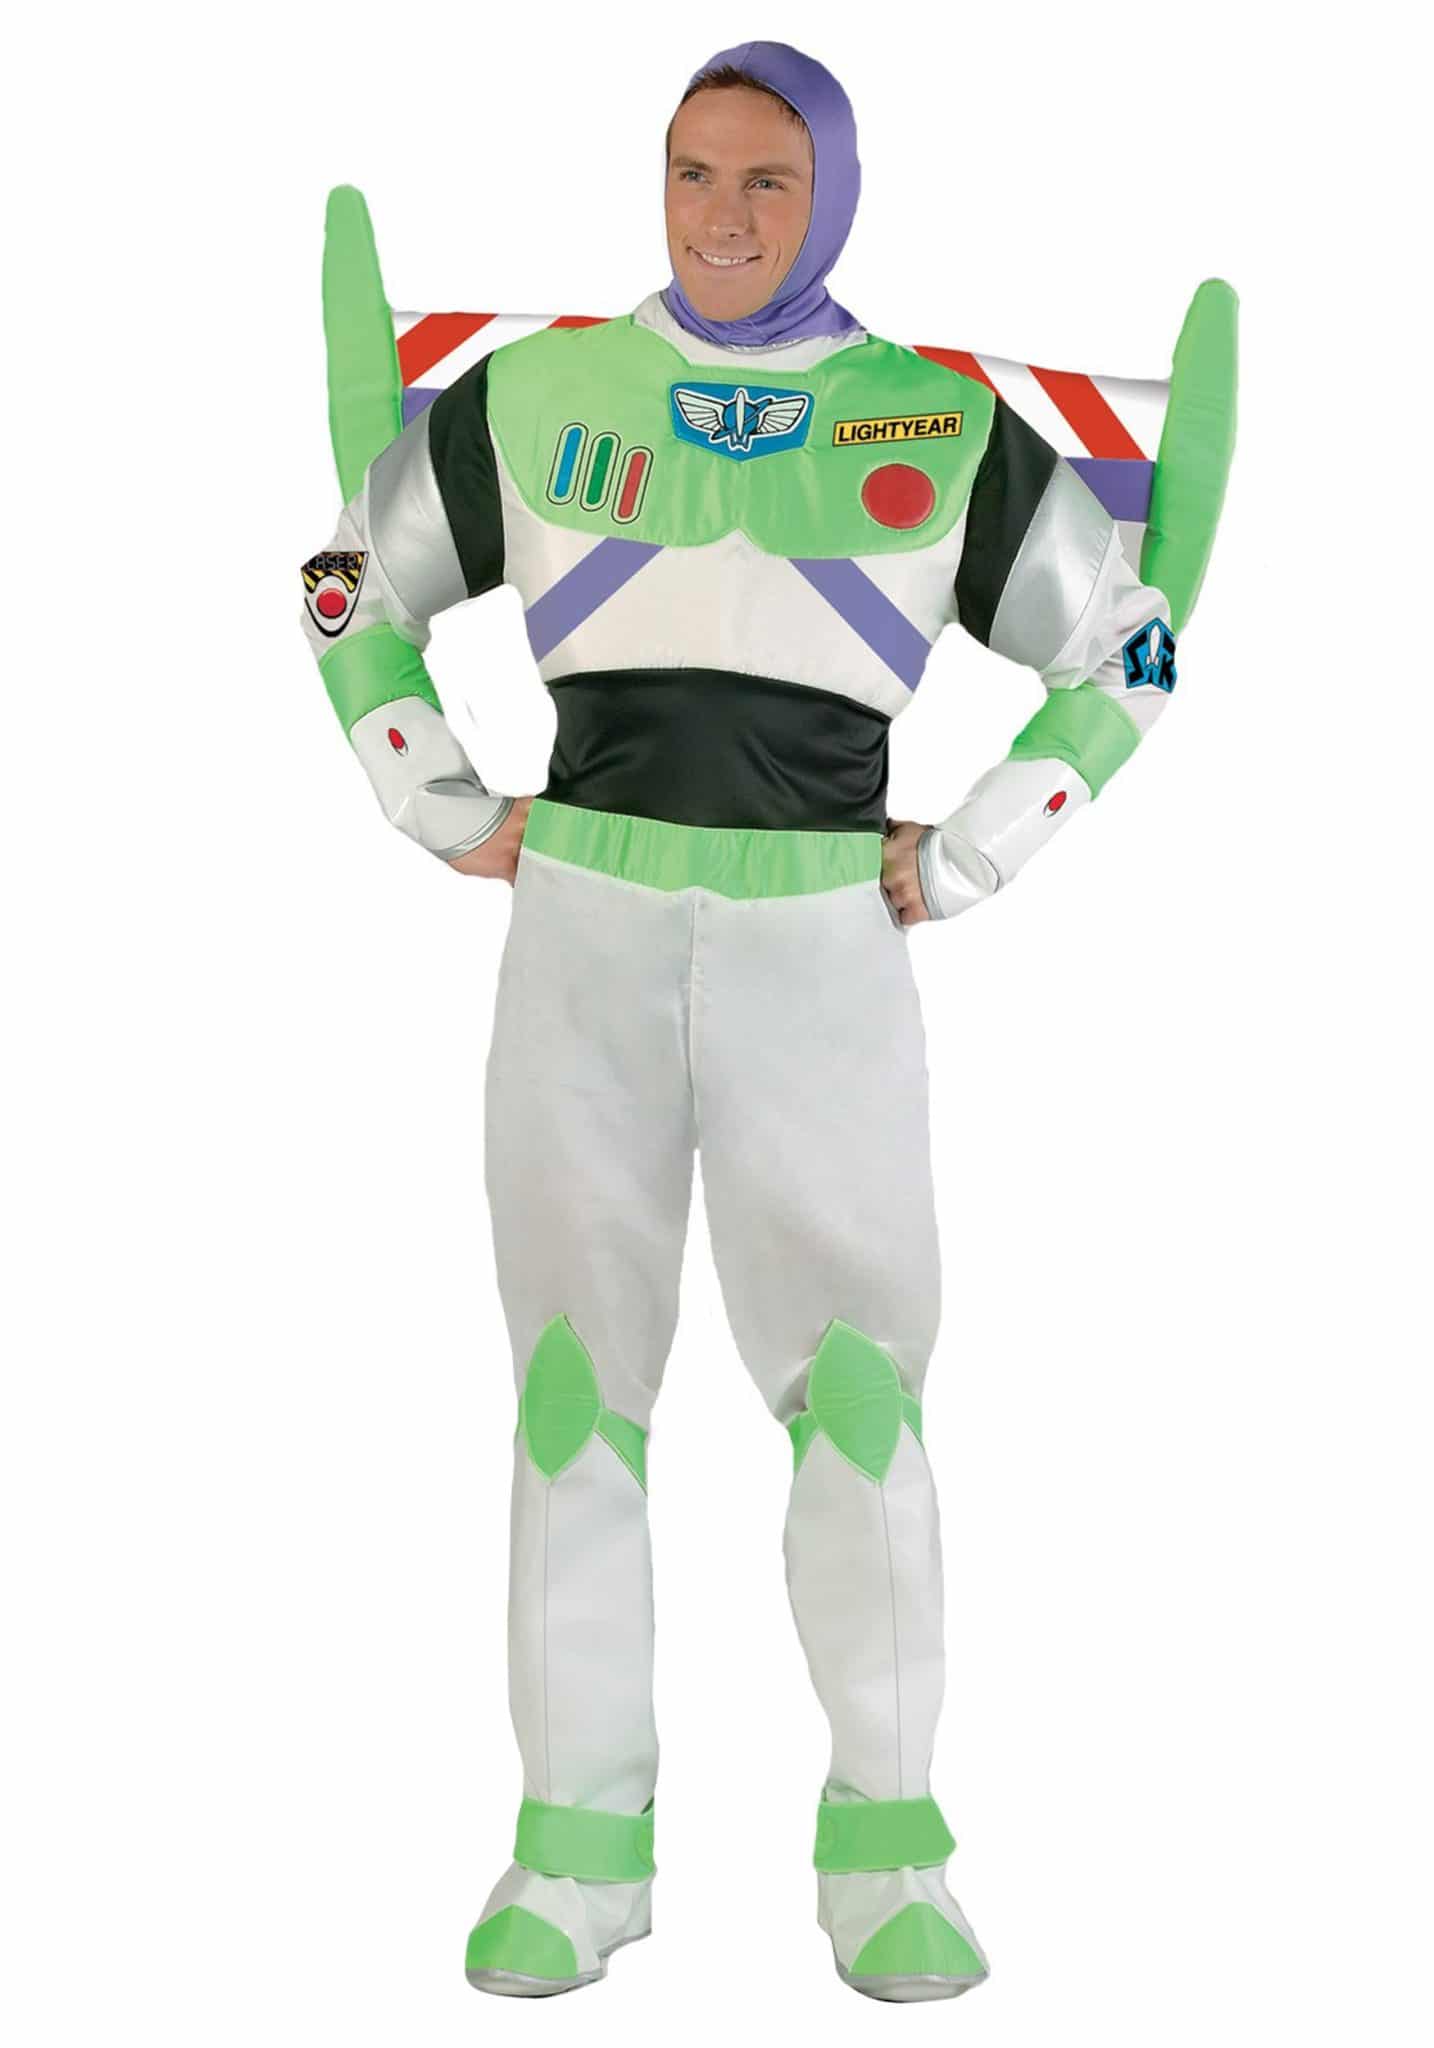 Toy Story 4 Halloween Costumes 2023: Adult Buzz Lightyear